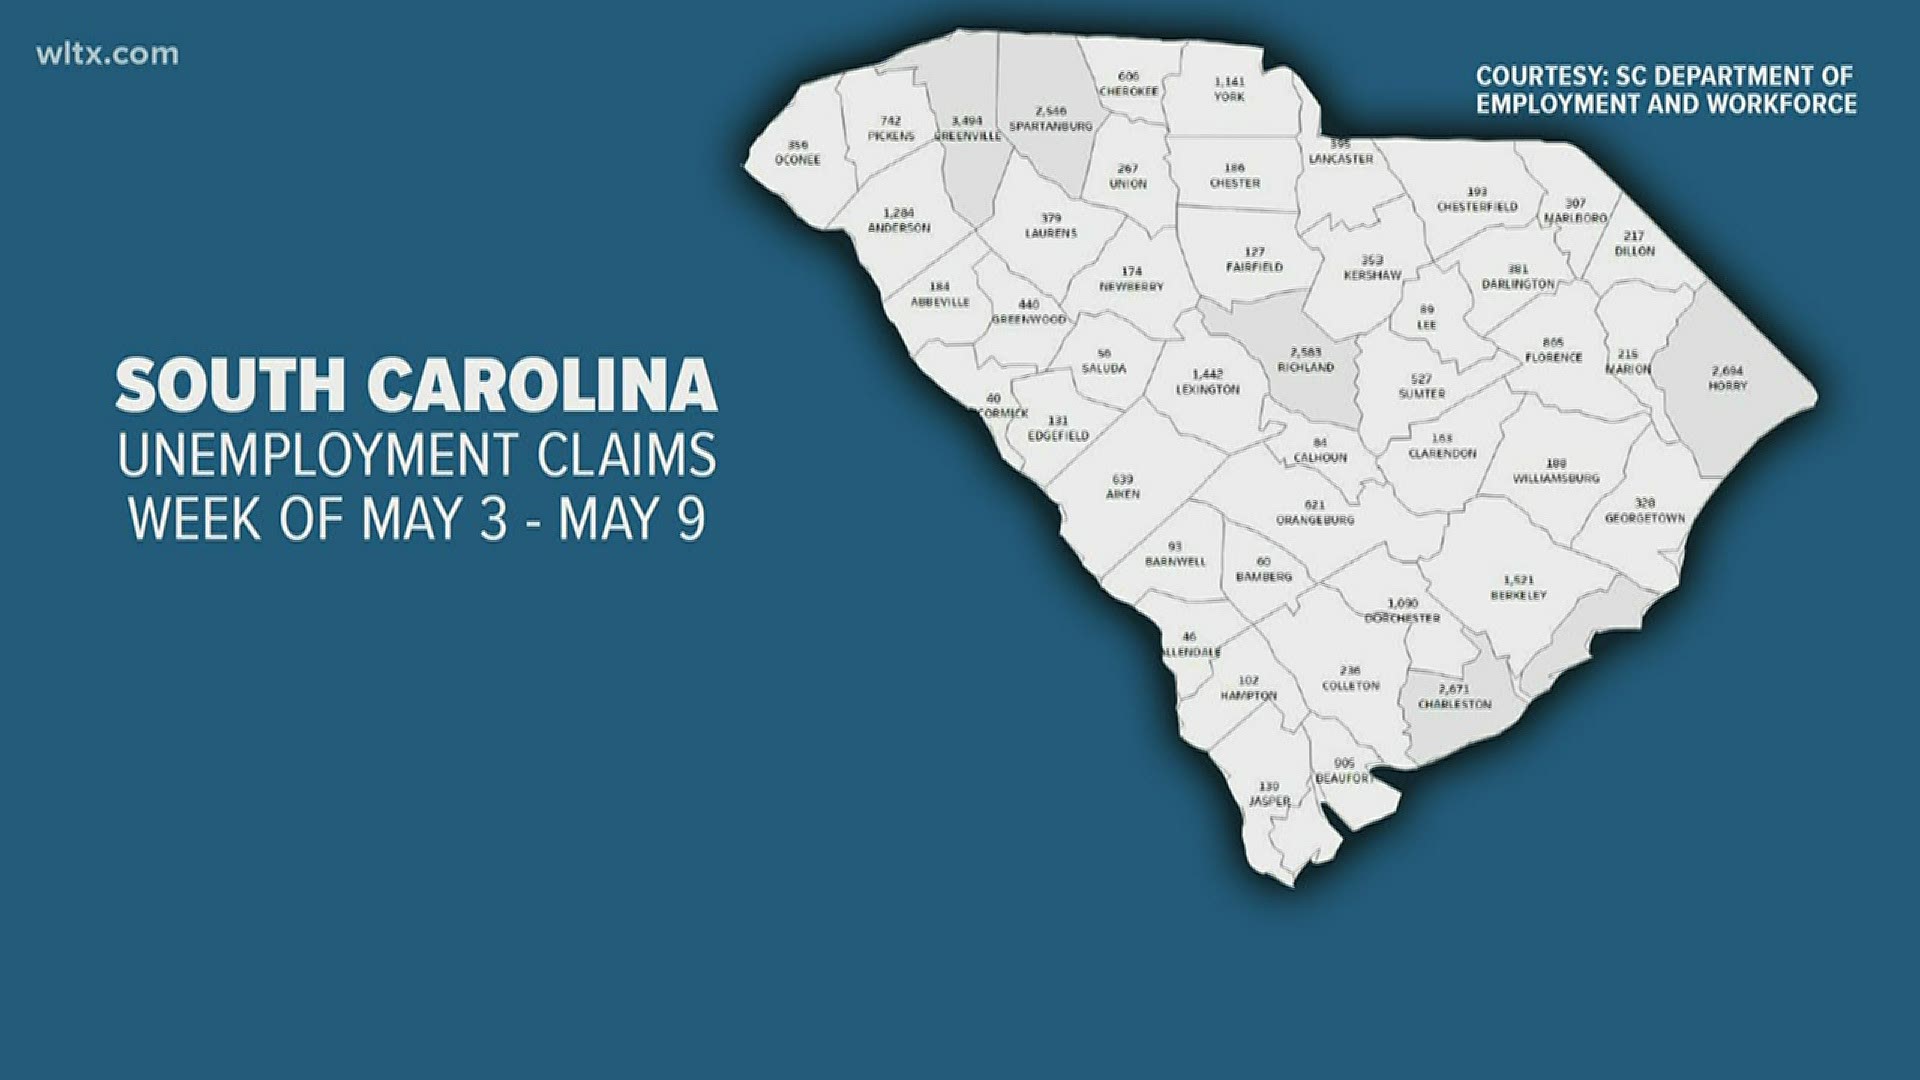 32,513 people filed for unemployment in South Carolina during the week ending May 9, 2020